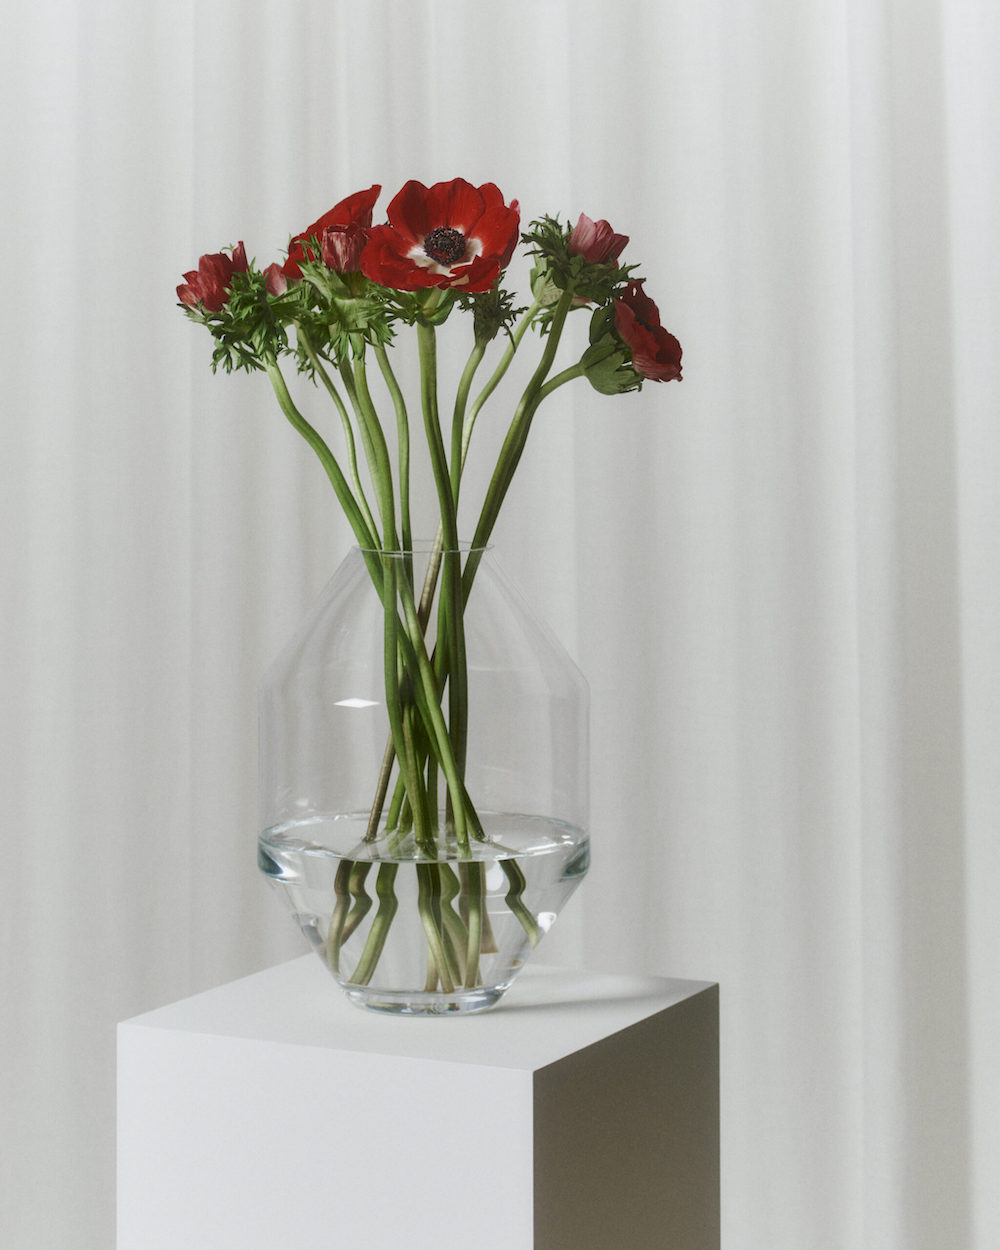 Hydro Vases by Sofie Østerby 4